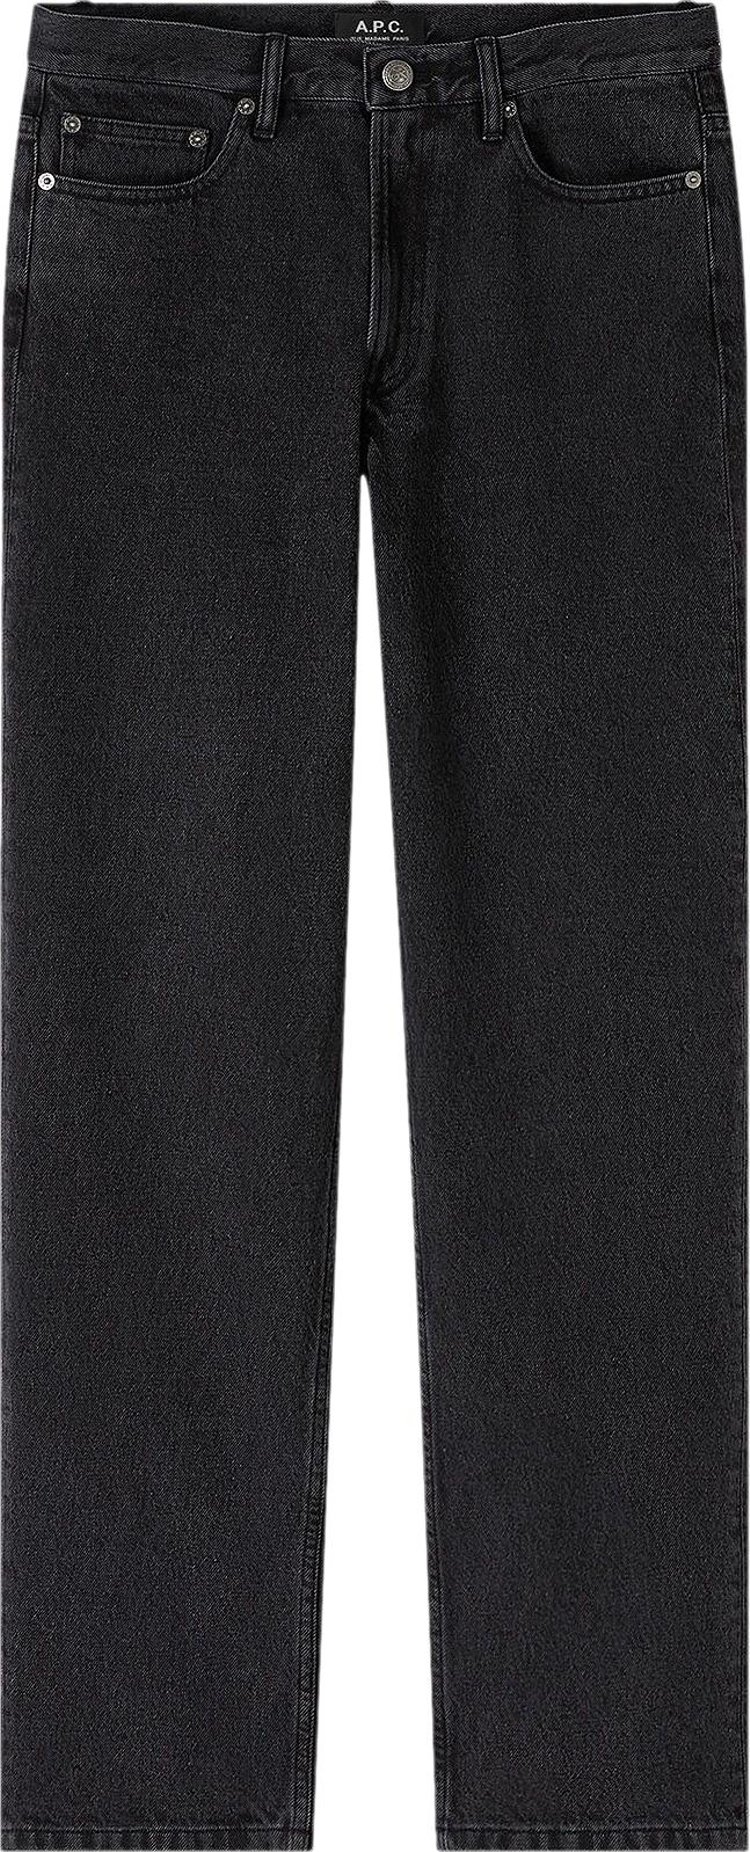 A.P.C. Martin Jean 'Washed Black'